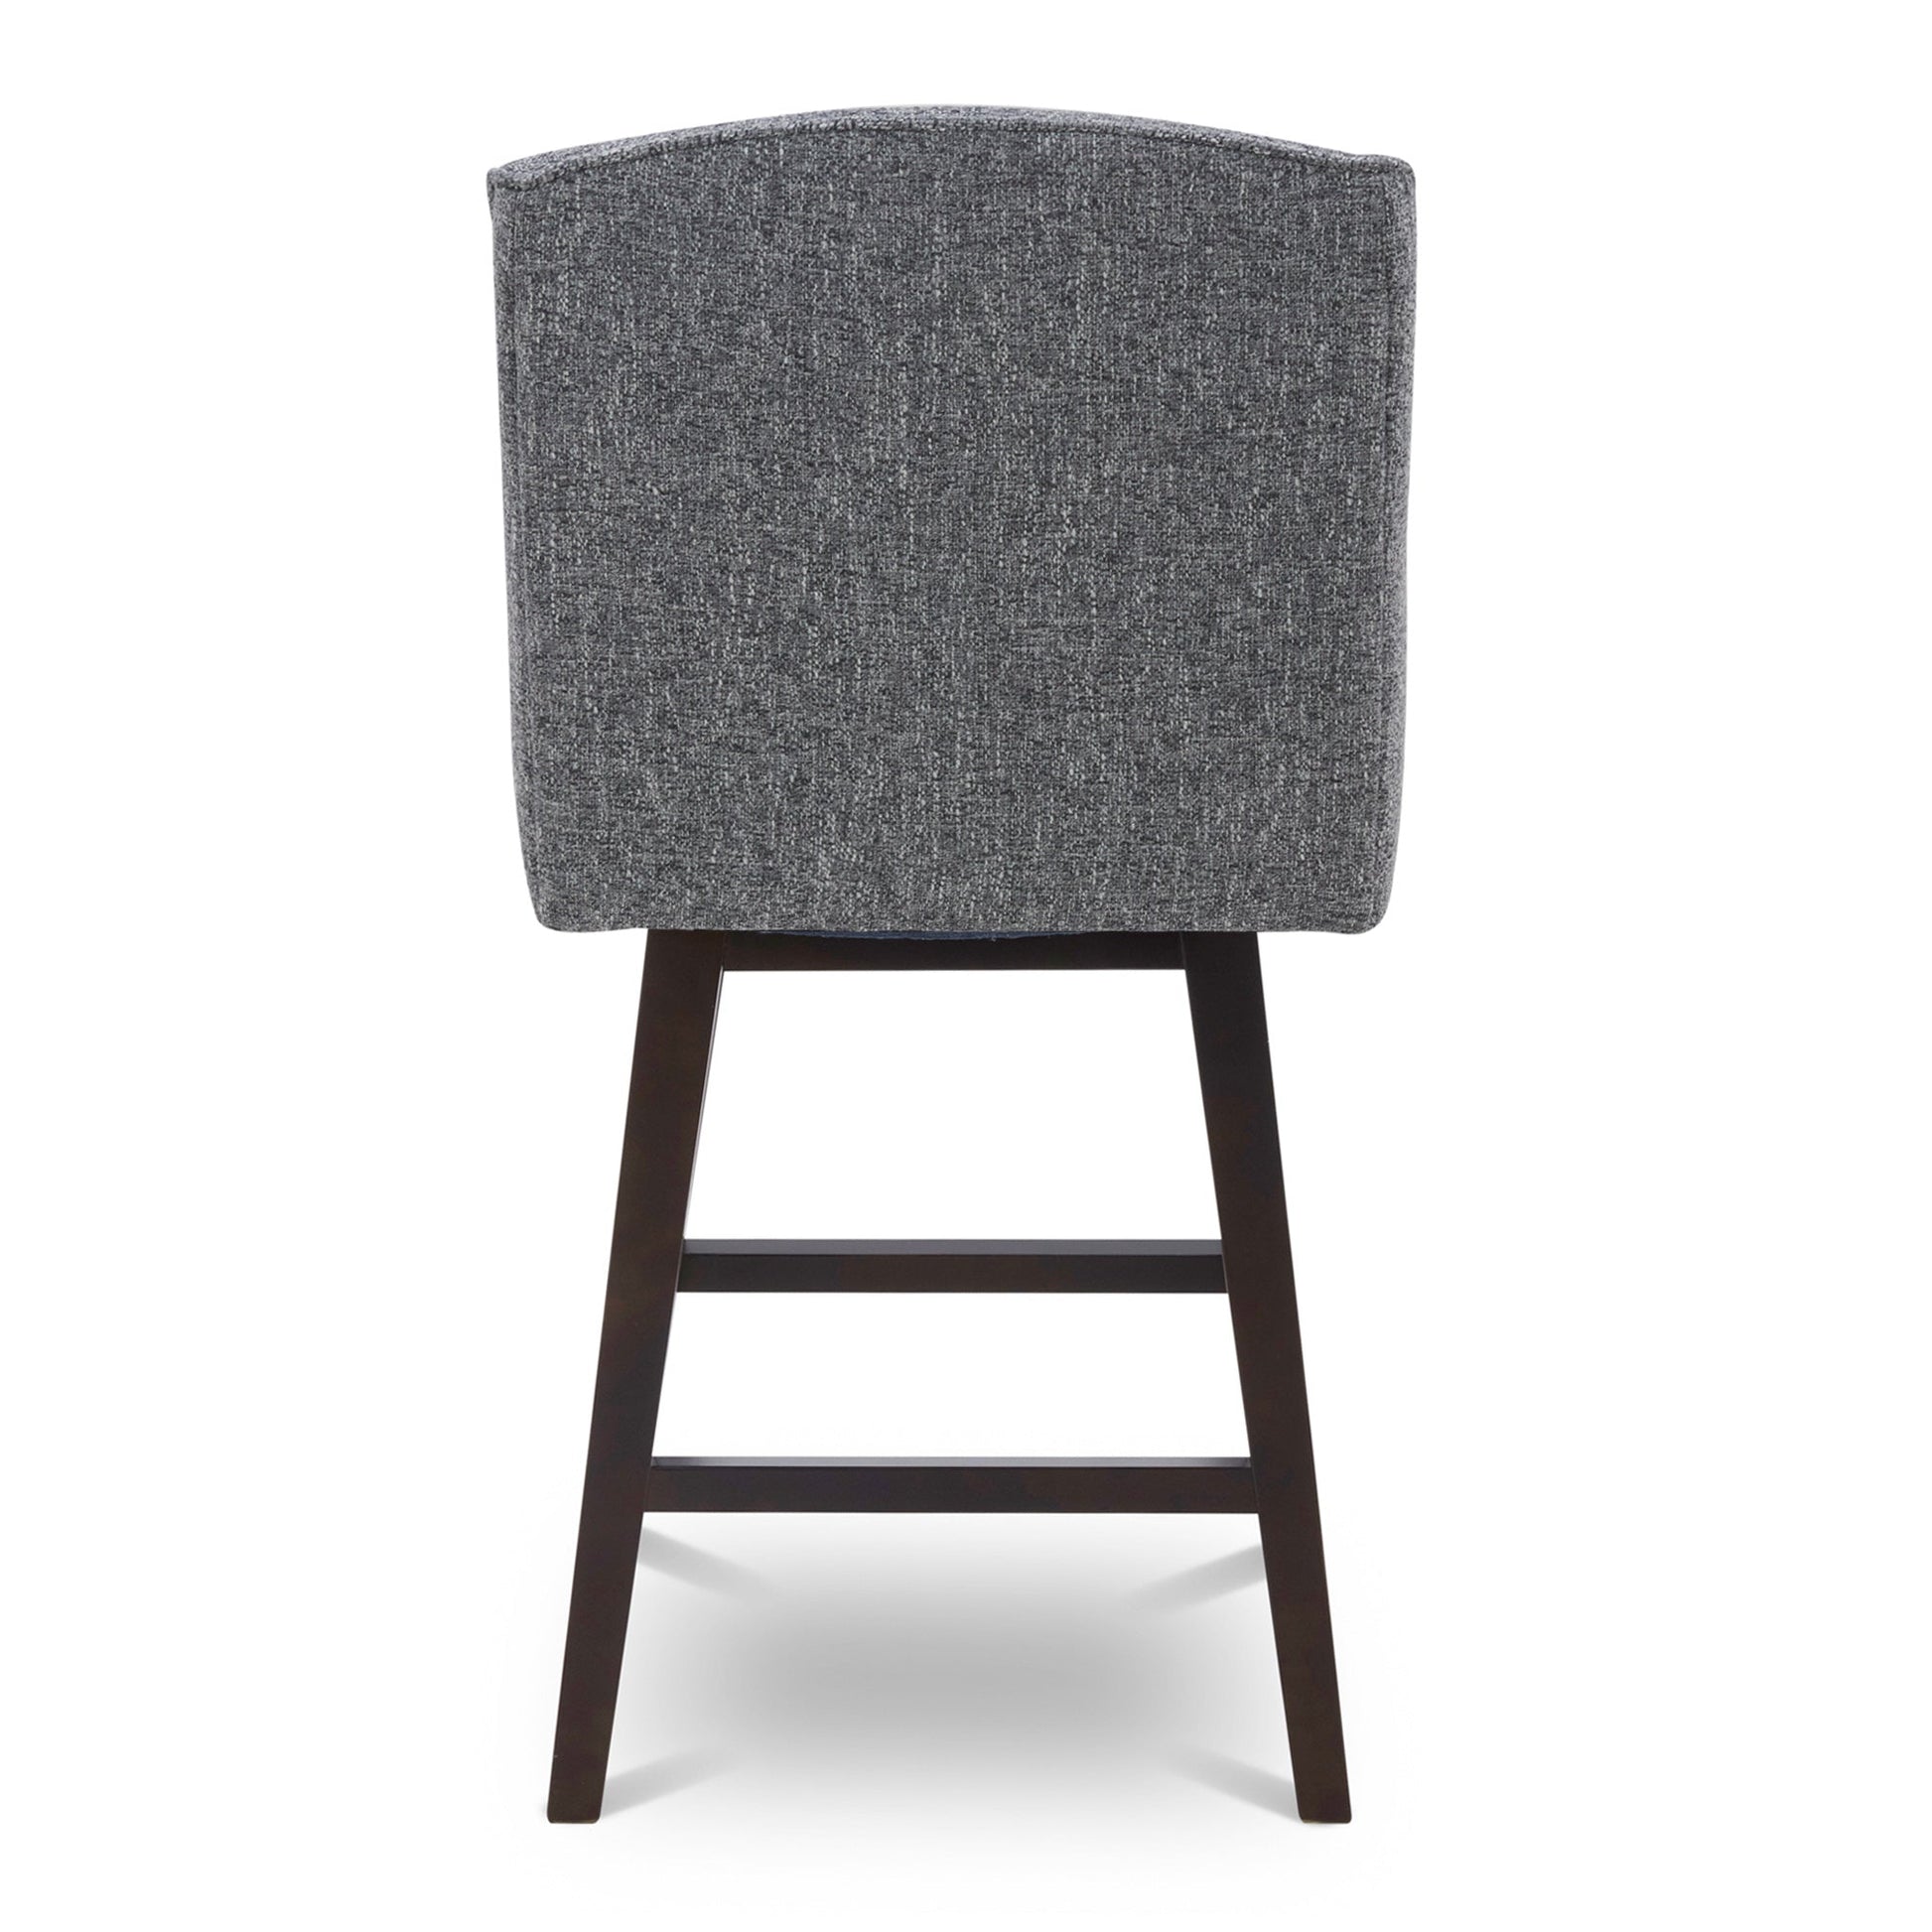 CHITA LIVING-Ryker Transitional Swivel Counter Stool - Fabric & Leather-Counter Stools-Fabric-Dark Grey (Multi-Colored)-1 Pack